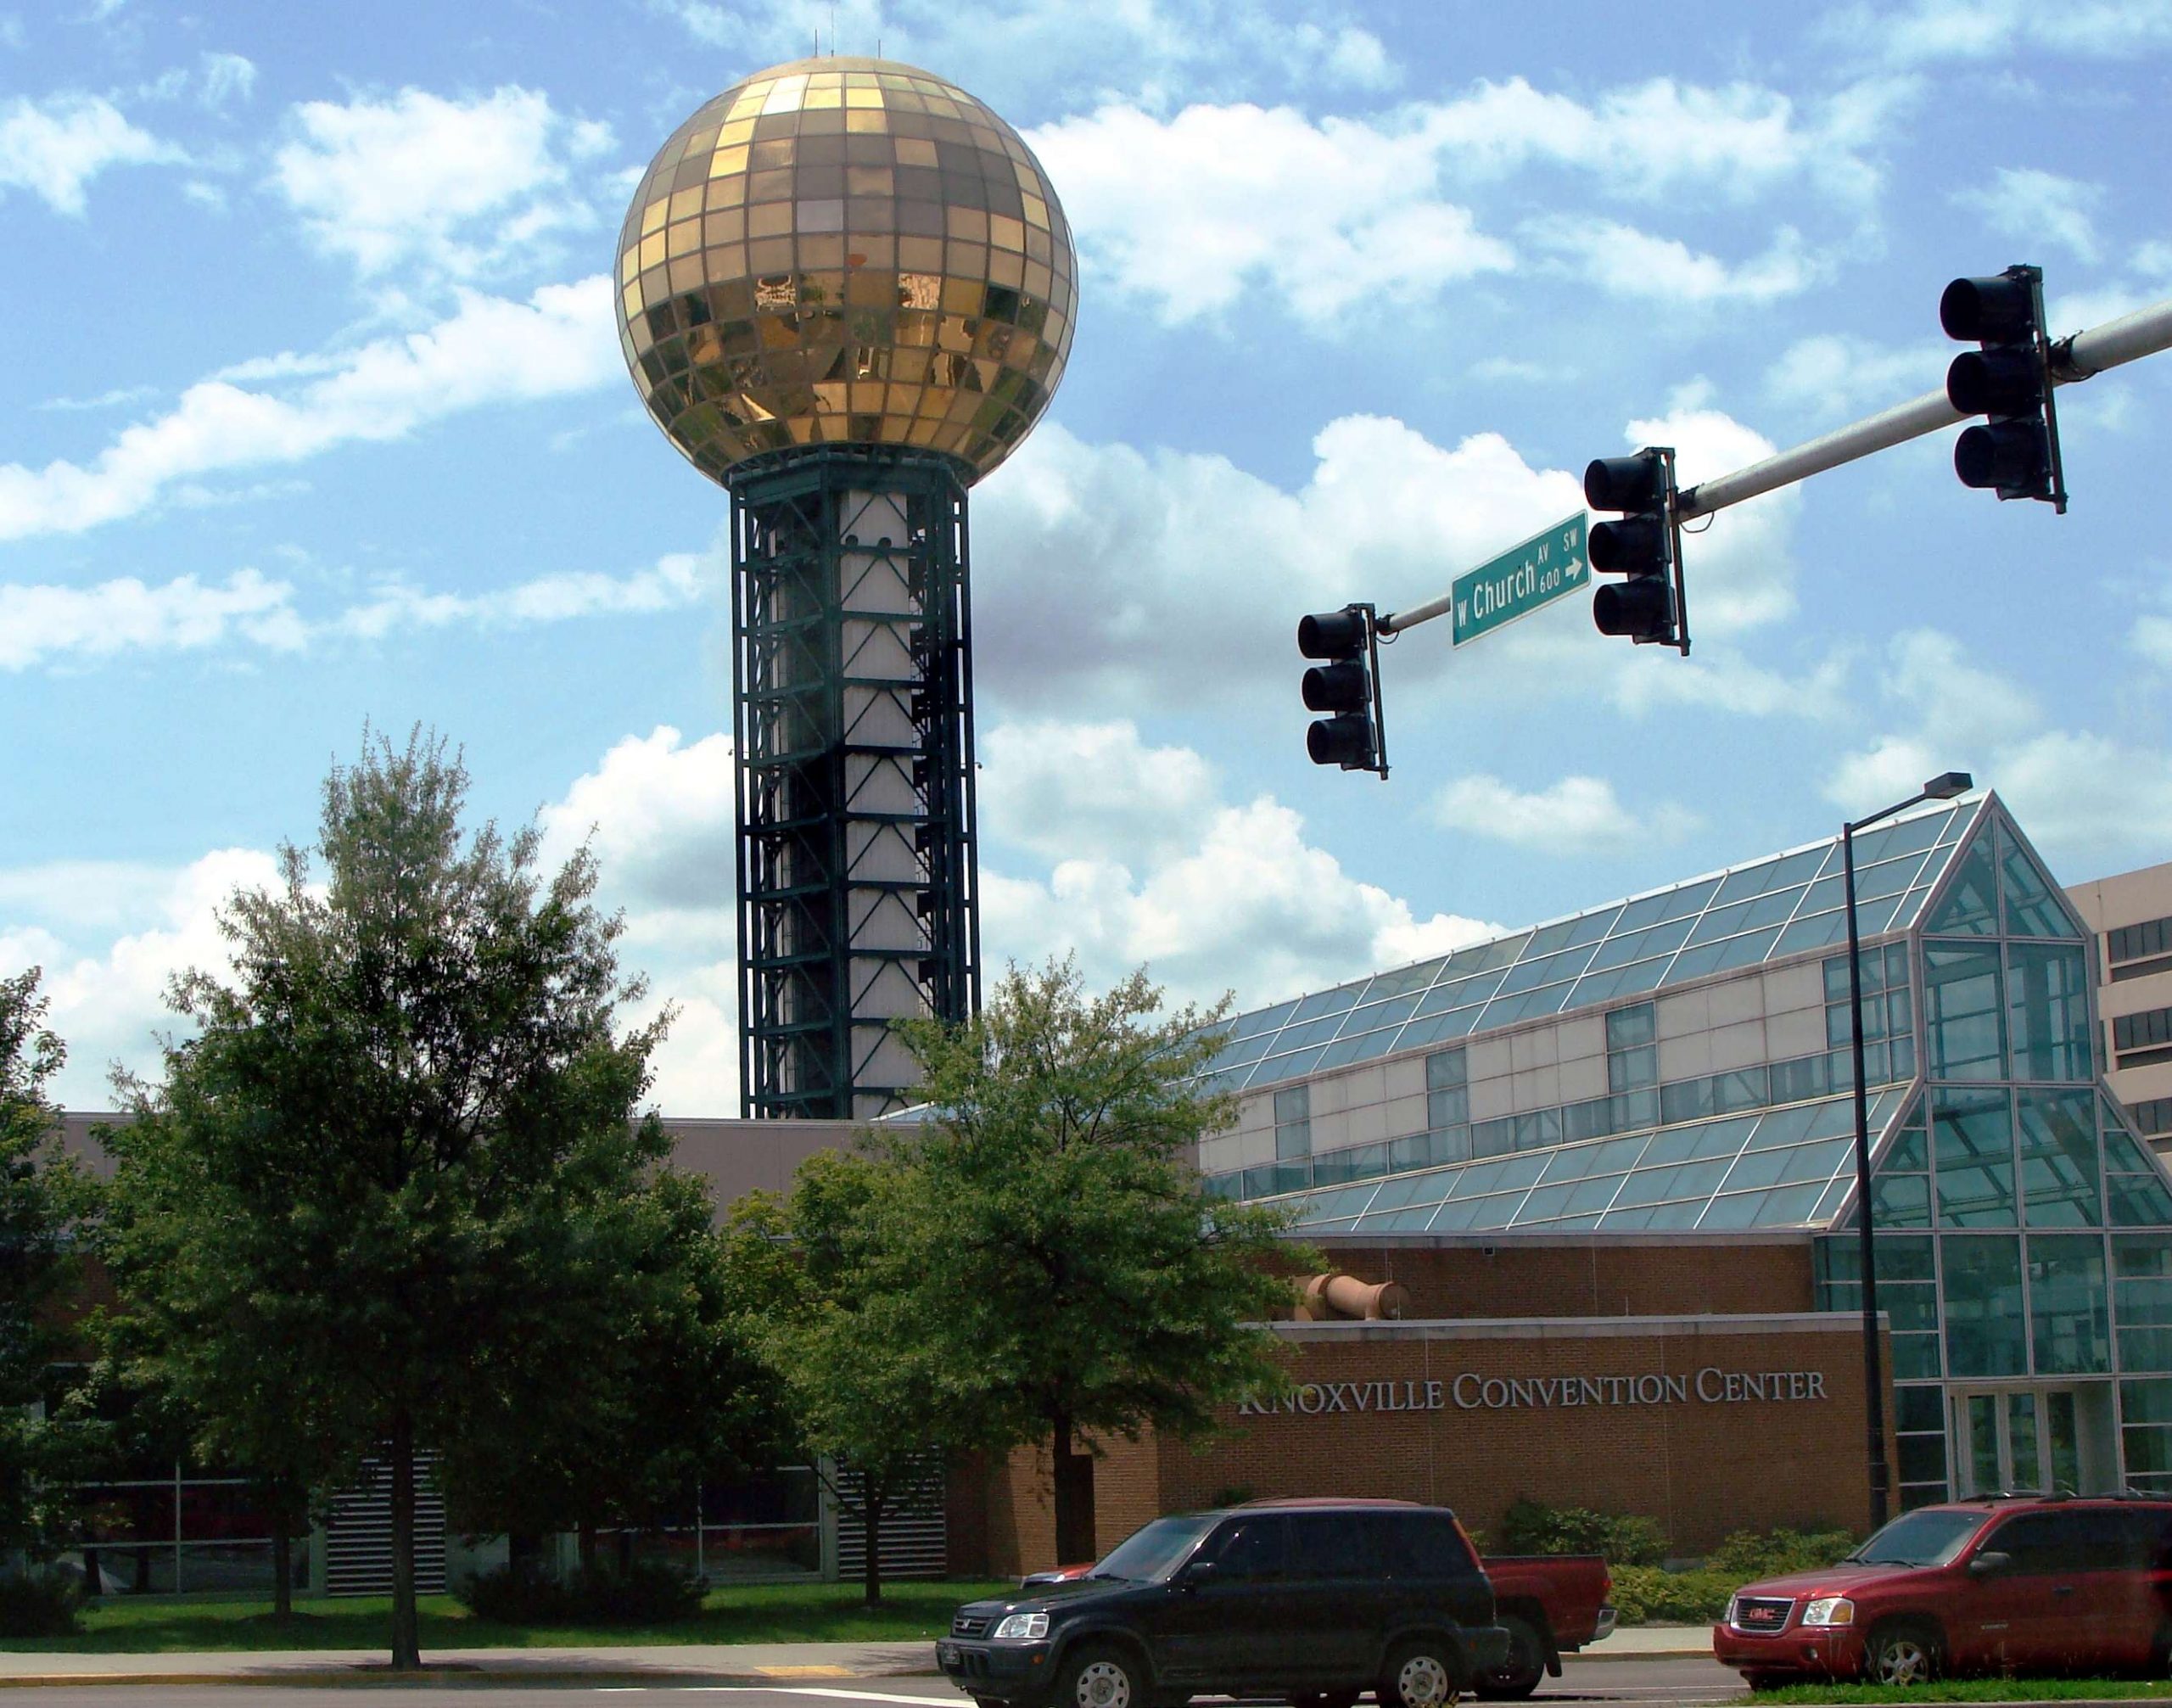 The 266-foot-high Sunsphere is the focal point of the Knoxville Convention Center, which occupies the former location of the U.S. Pavilion of the 1982 Worldâs Fair. When you see it, youâre close. Touch screens, boxed stable shelf milk and Cherry Coke were introduced at that fair.